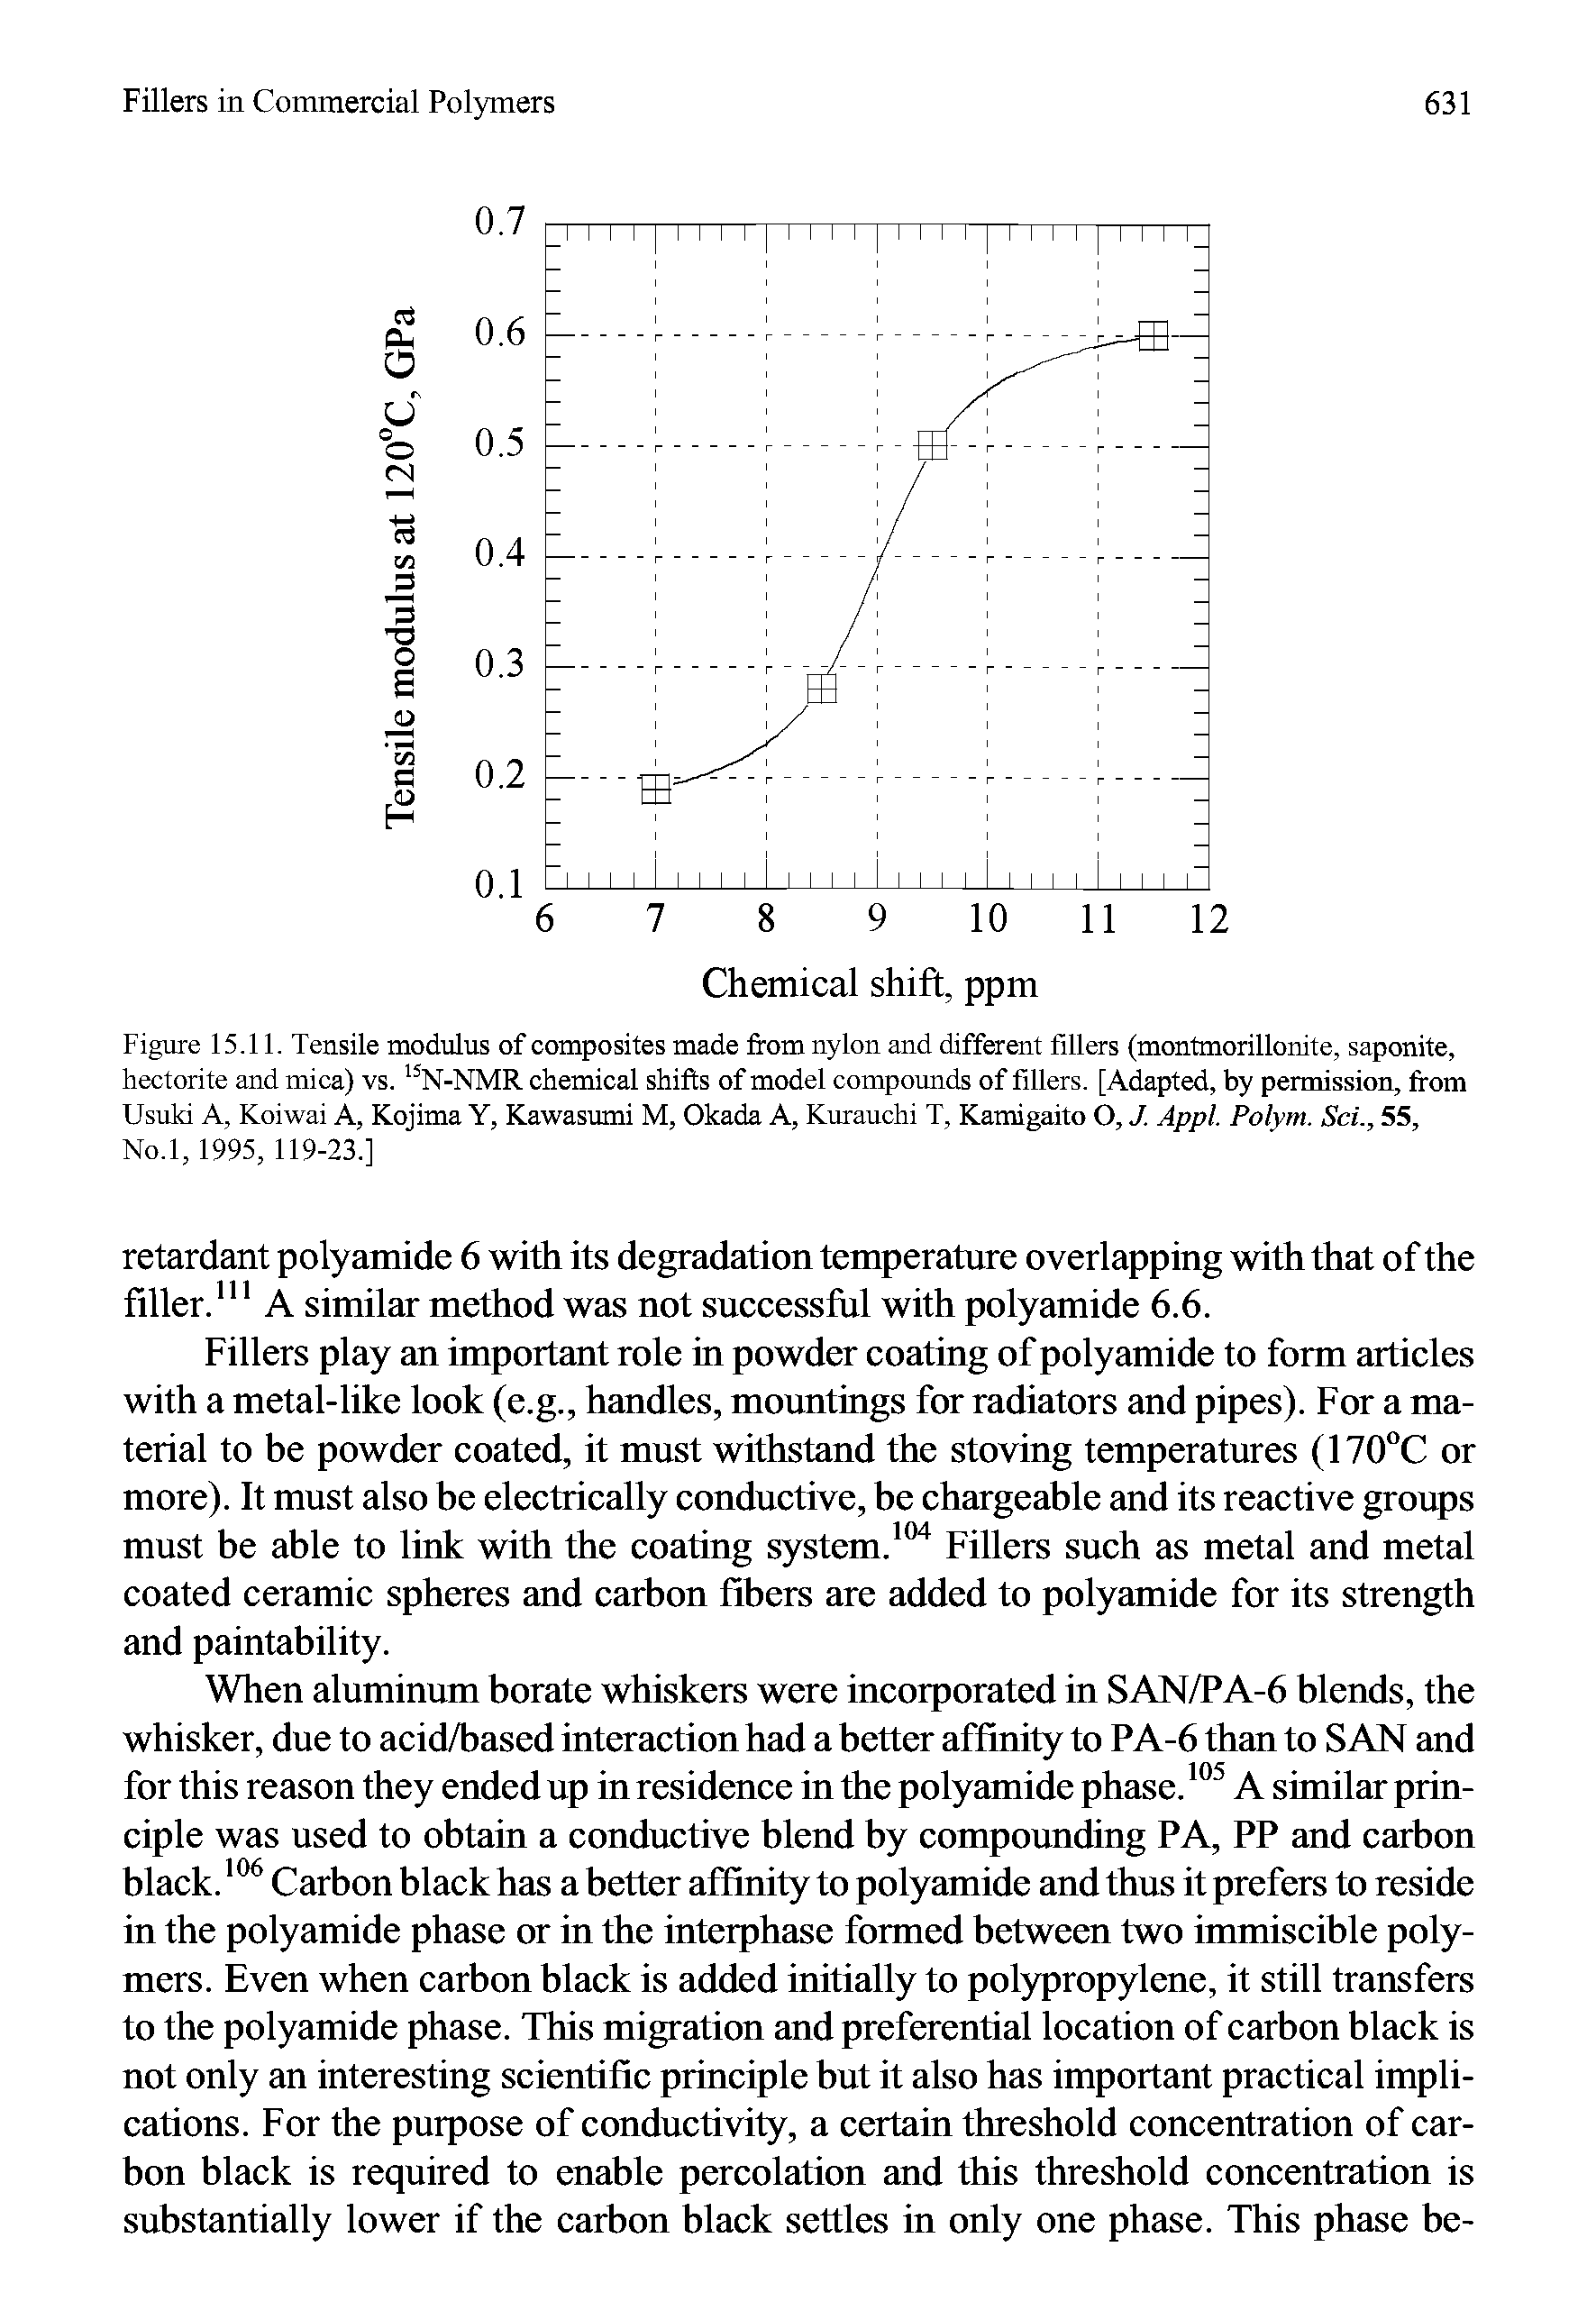 Figure 15.11. Tensile modulus of composites made from nylon and different fillers (montmorillonite, saponite, hectorite and mica) vs. N-NMR chemical shifts of model compounds of fillers. [Adapted, by permission, from Usuki A, Koiwai A, Kojima Y, Kawasumi M, Okada A, Kurauchi T, Kamigaito O, J. Appl. Polym. Sci., SS, No.l, 1995, 119-23.]...